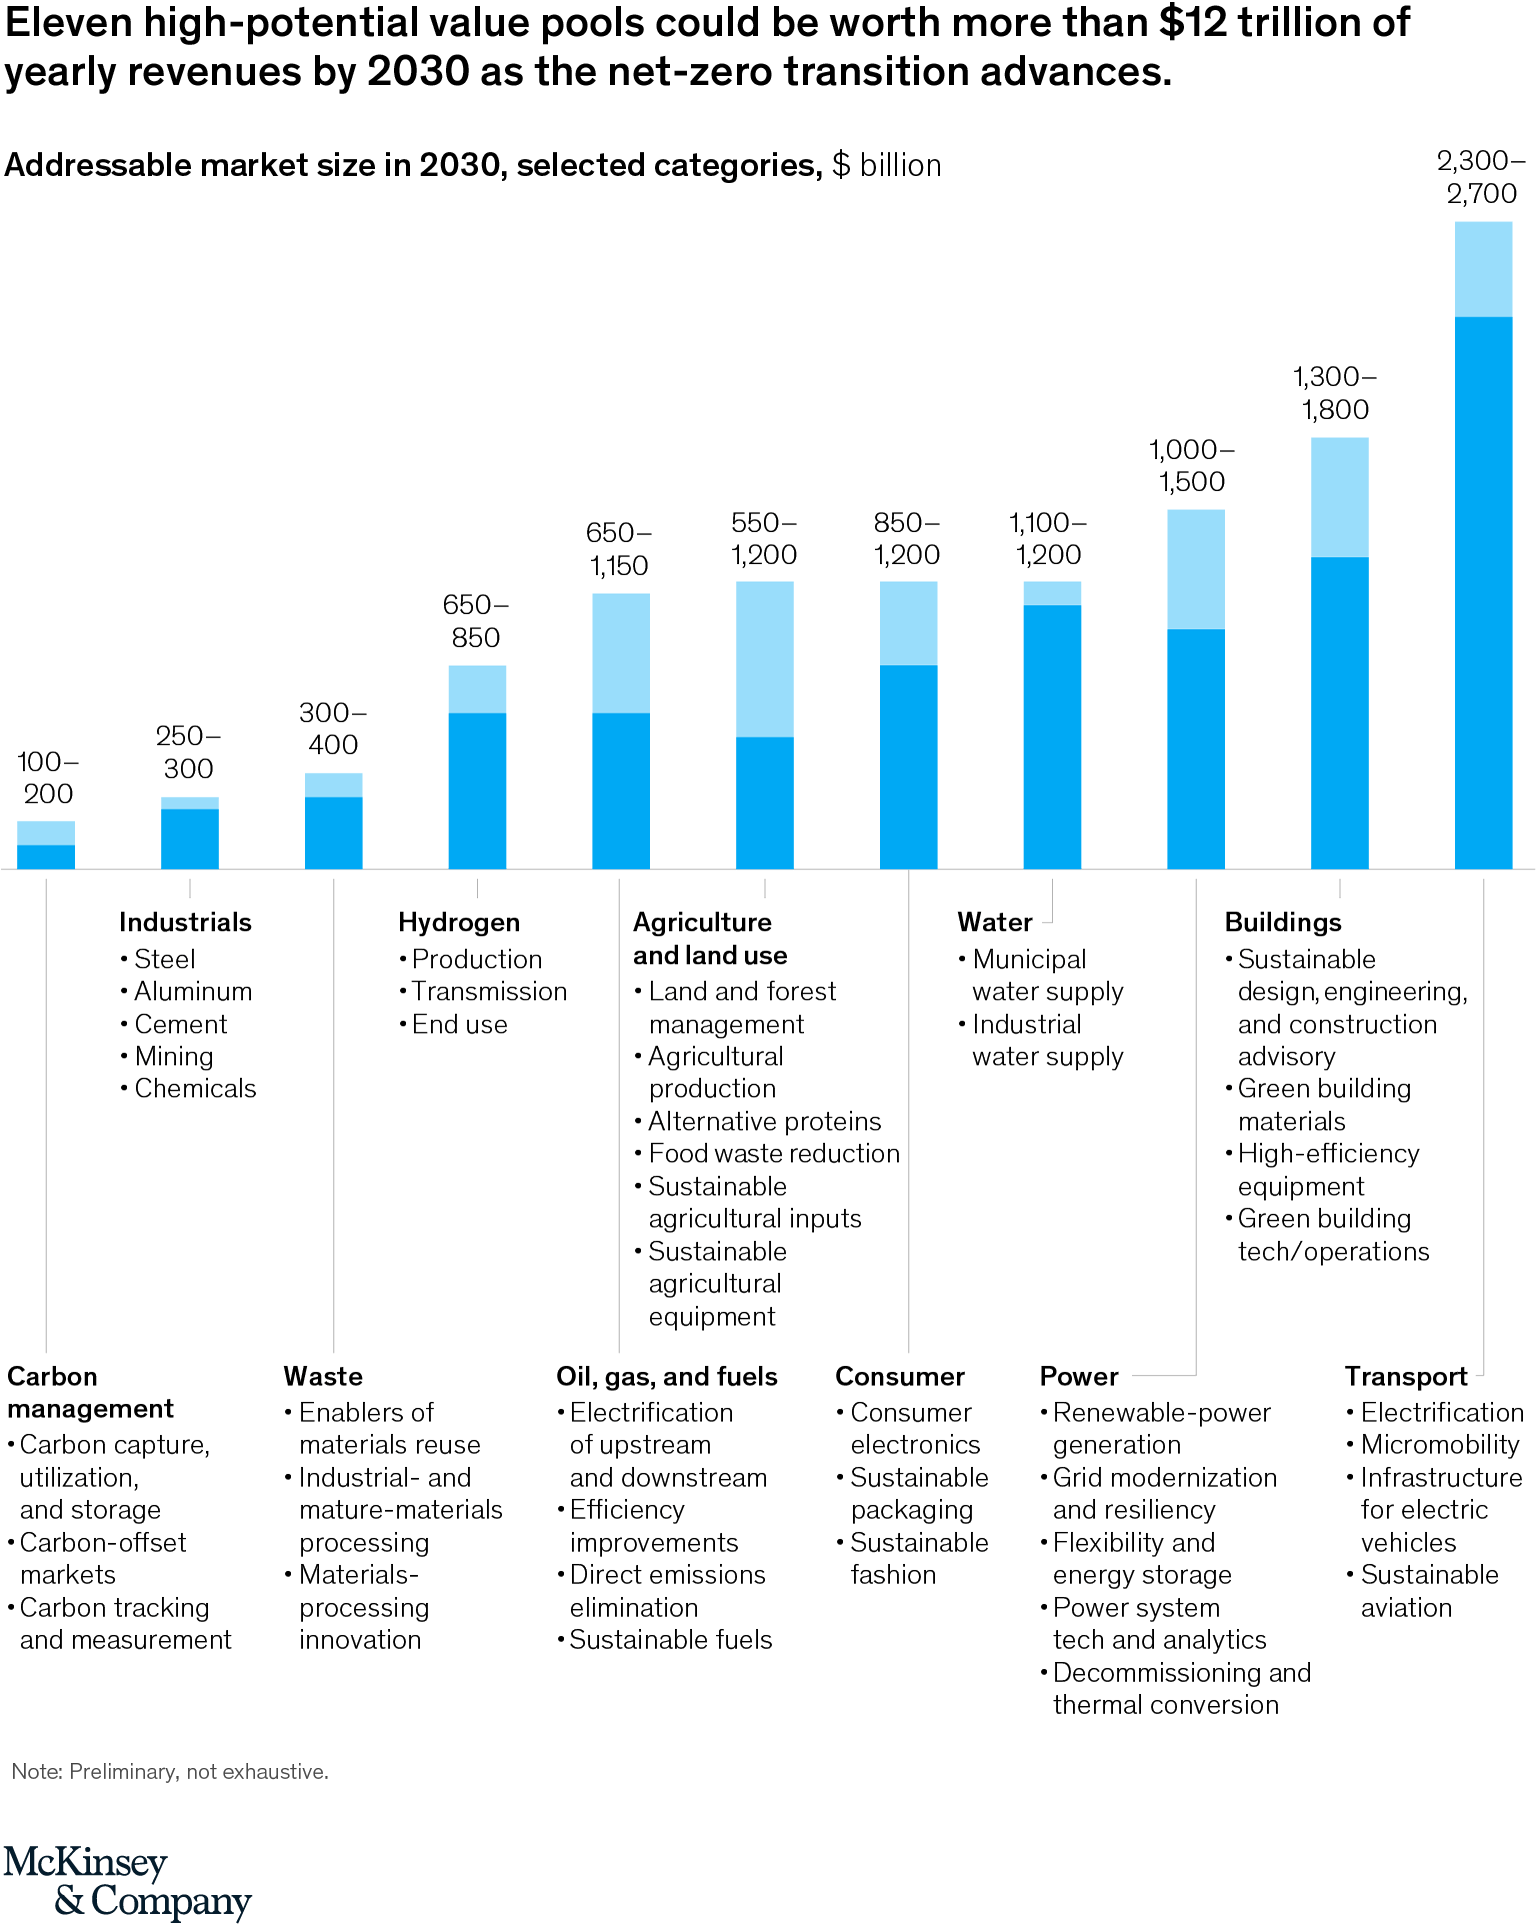 A chart titled, "Eleven high-potential value pools could be worth more than $12 trillion of yearly revenues by 2030 as the net-zero transition advances." Click to open the full article on McKinsey.com.